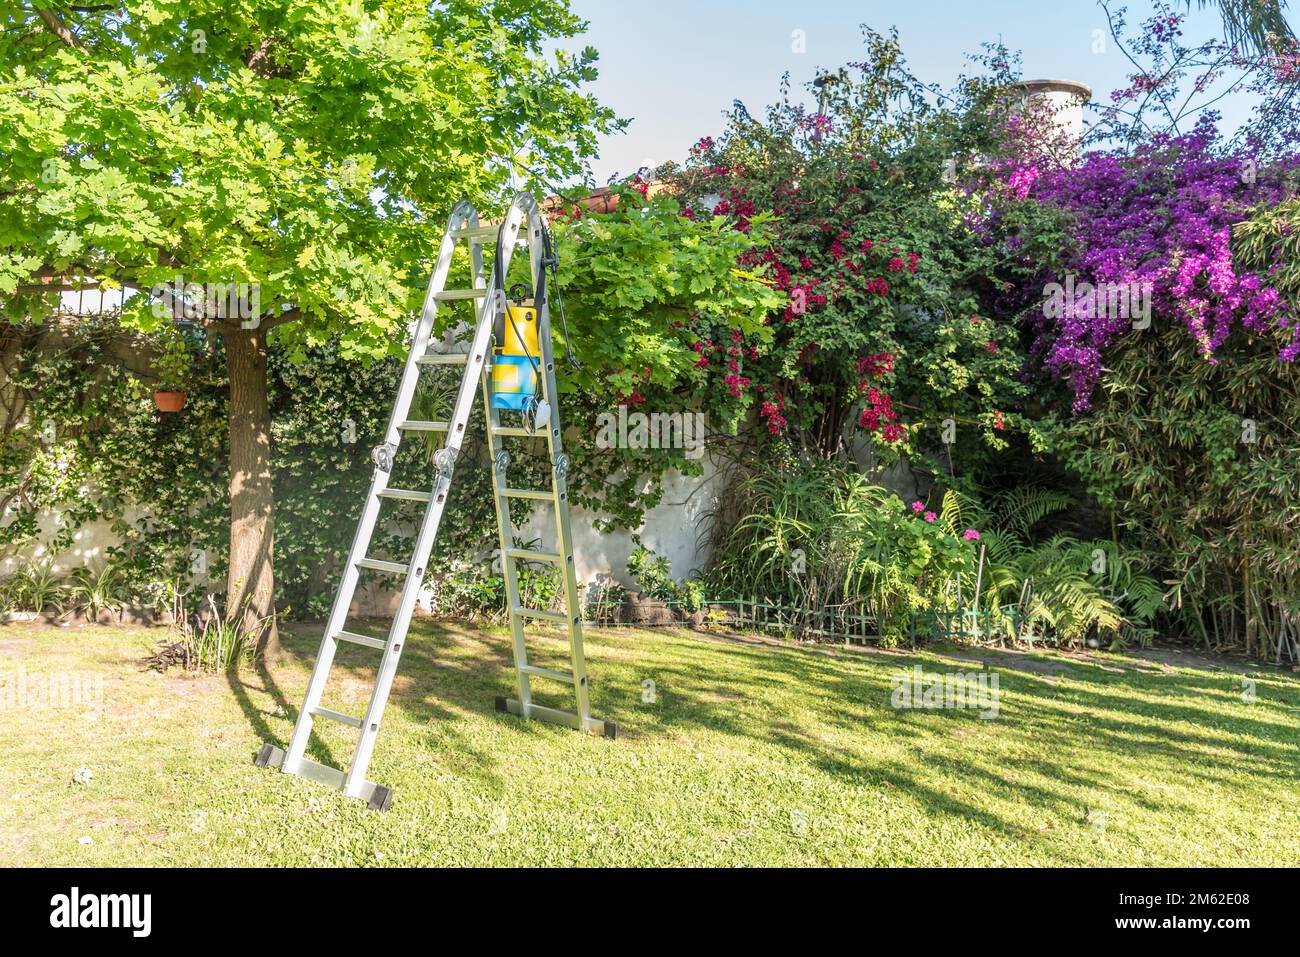 Metal ladder and insecticide sprayer in the garden ready for use.  Stock Photo